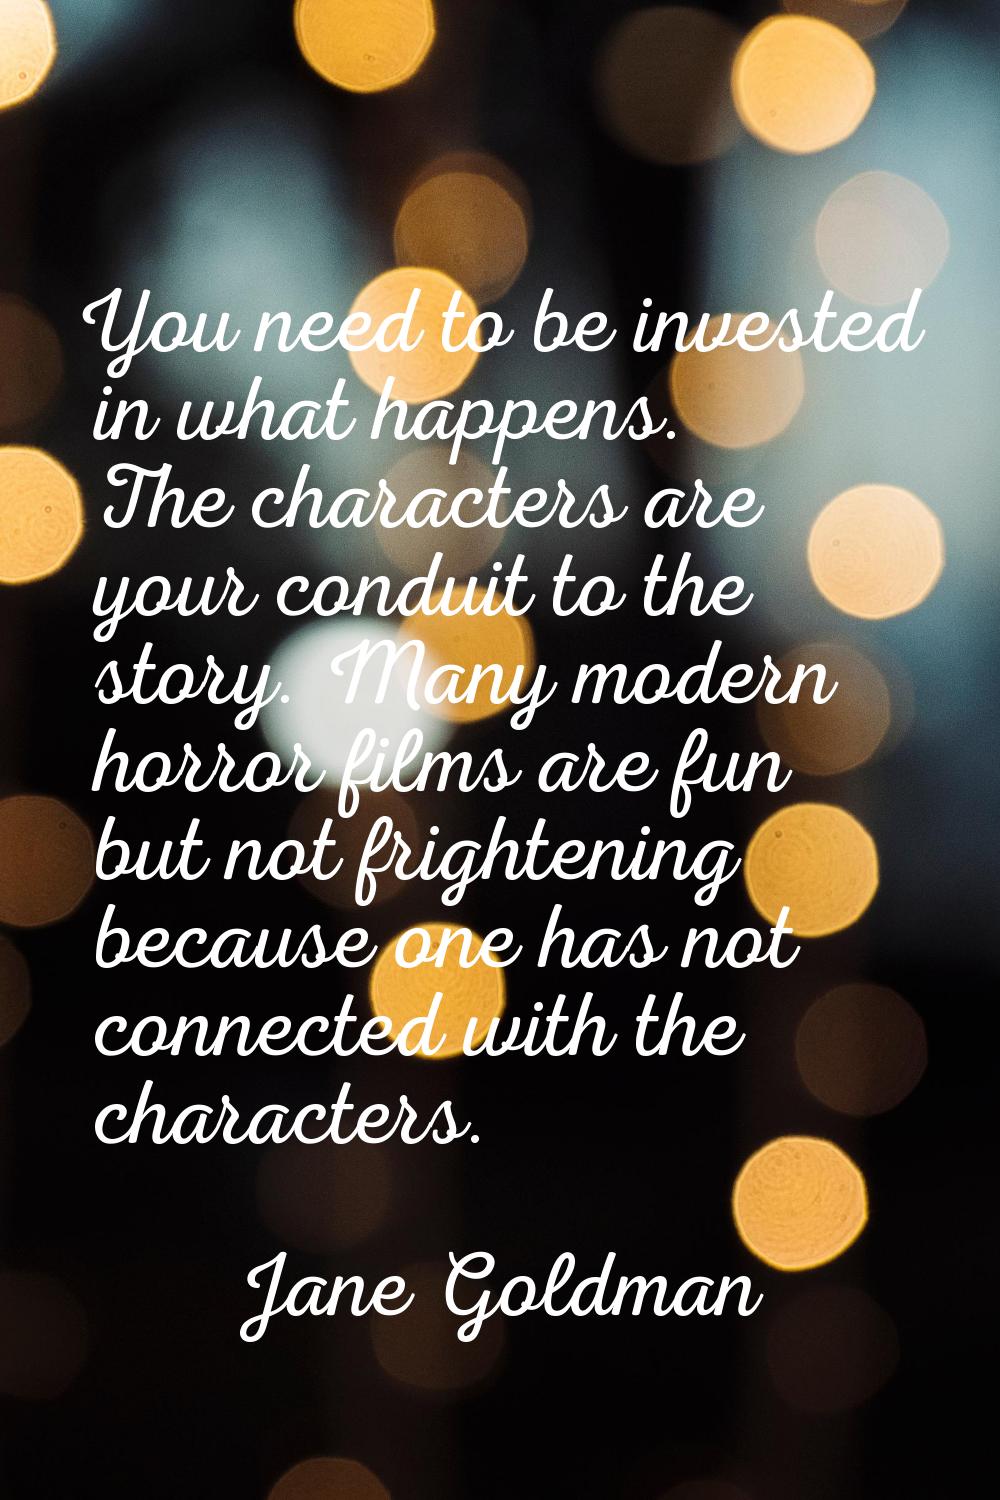 You need to be invested in what happens. The characters are your conduit to the story. Many modern 